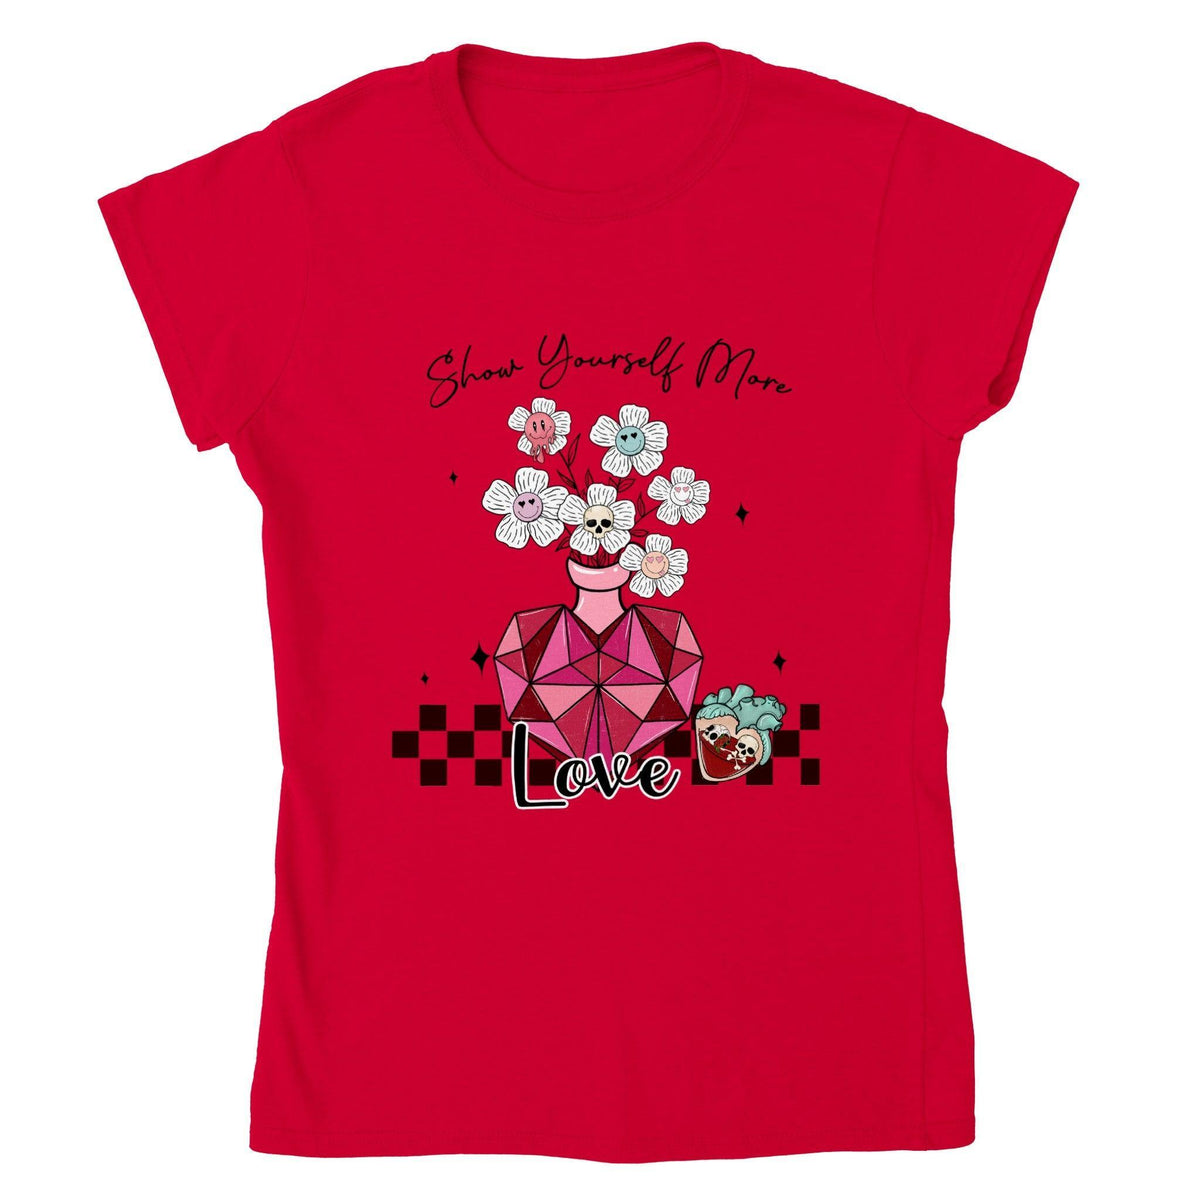 SHOW YOURSELF VALENTINE T-shirt-Regular Fit Tee-StylinArts